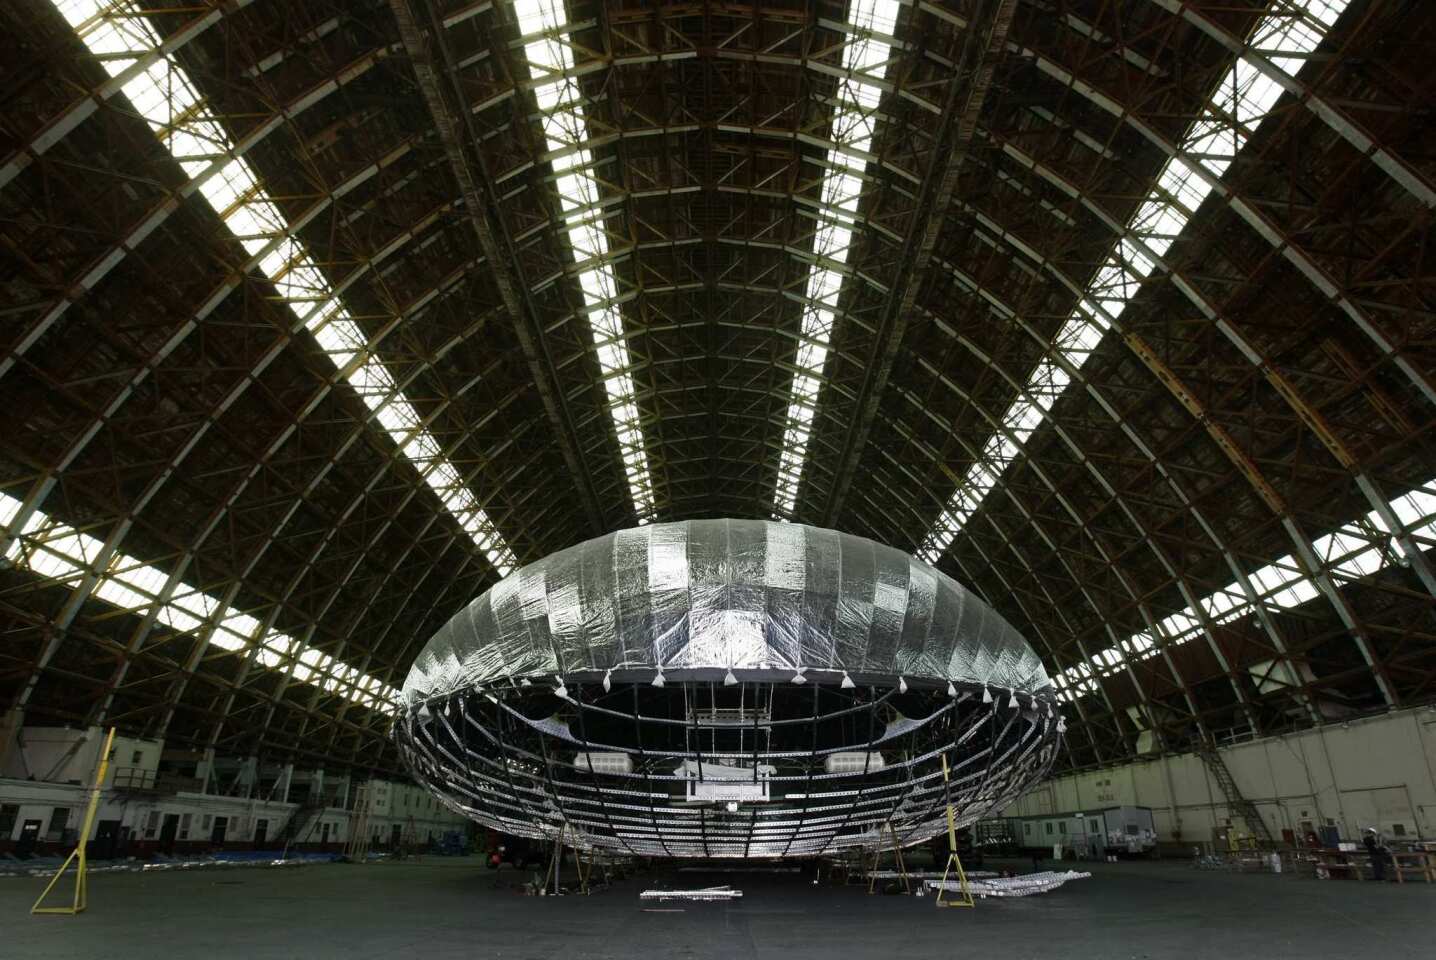 A new blimp-like airship is being constructed by Worldwide Aeros in a World War II-era blimp hanger at a former military base in Tustin. The airship will be used by the military to carry tons of cargo to remote areas around the world.